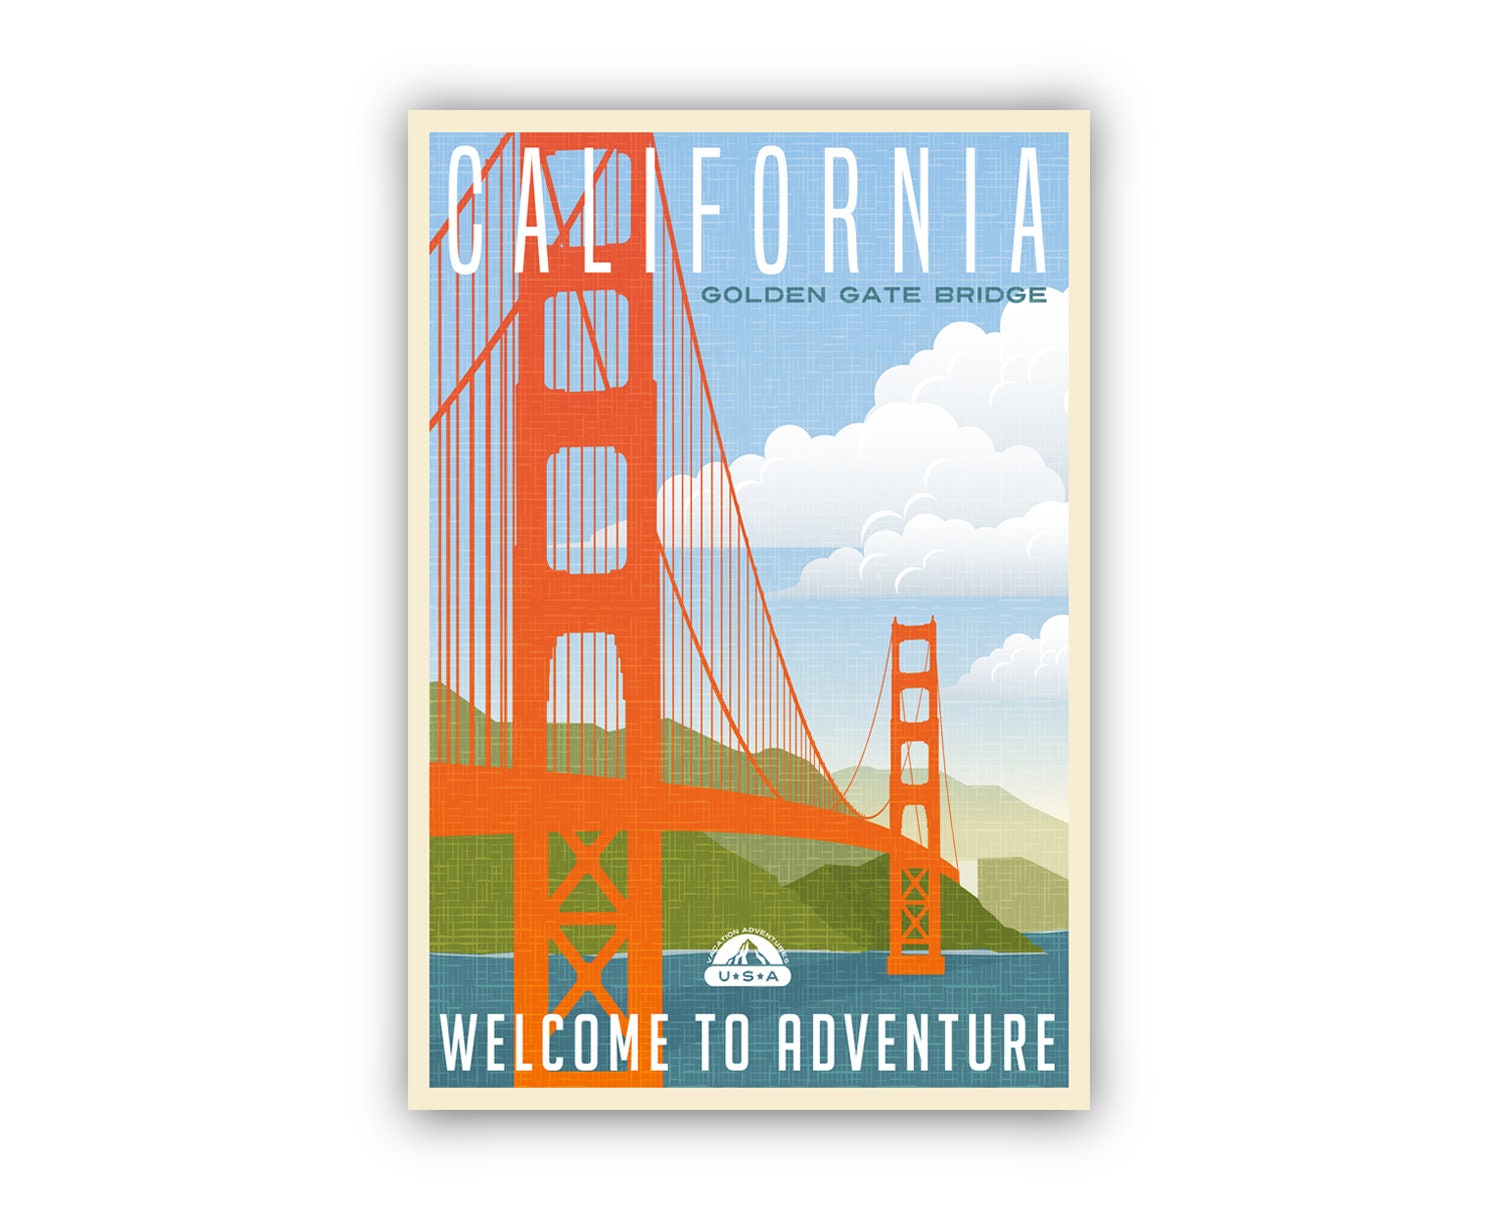 Retro Style Travel Poster, California Vintage Rustic Poster Print, Home Wall Art, Office Wall Decor, Posters, California, State Map Poster